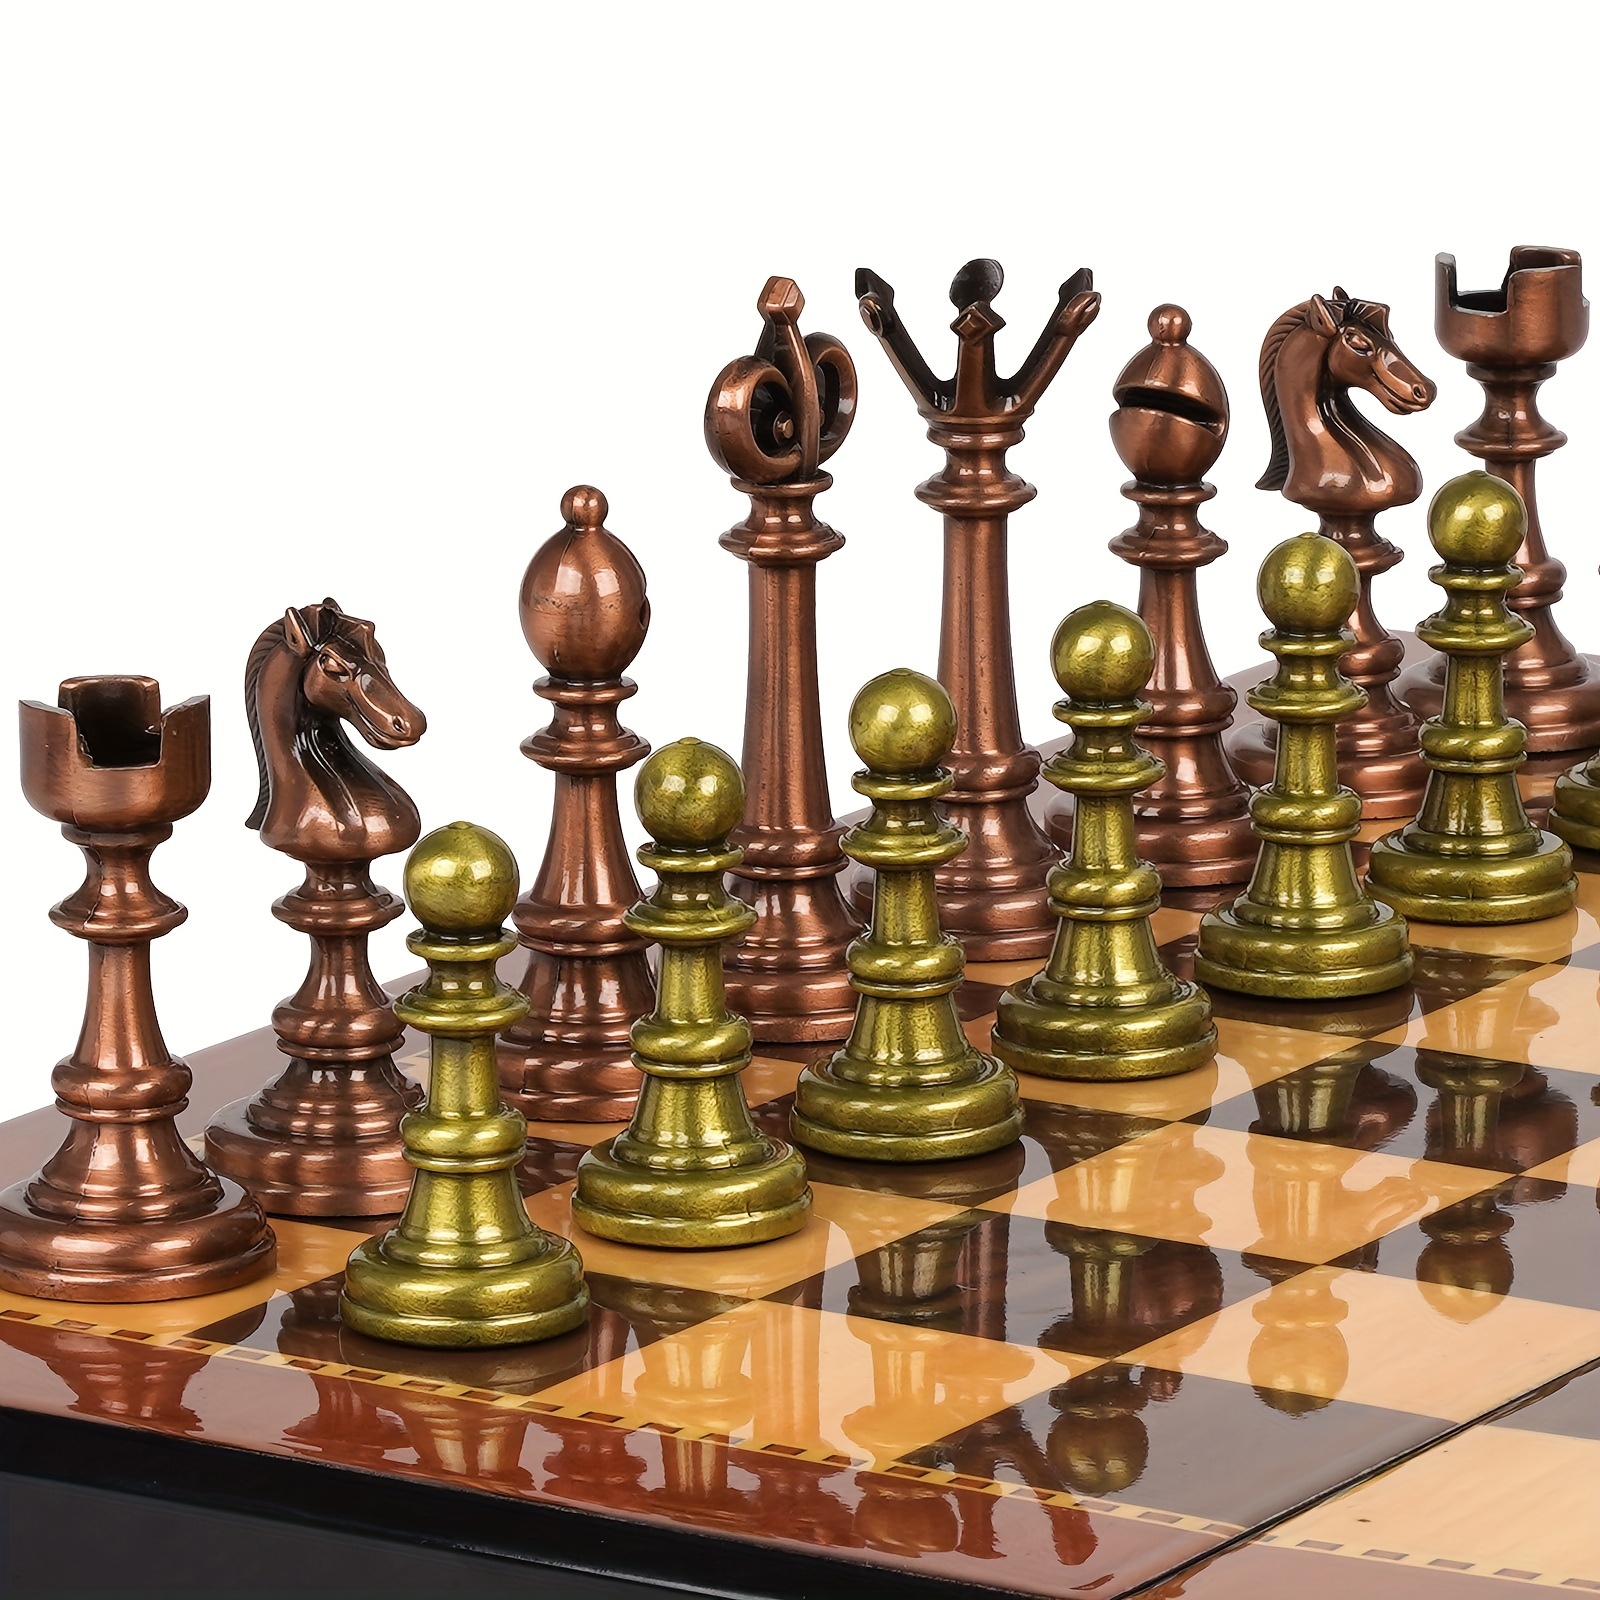 

Vintage Metal Chess Set For Adults Wooden Chess Board With Metal Chess Pieces Travel Chess Set With Metal Chessmen Collectible Elegant Chess Game Family Vintage Board Game